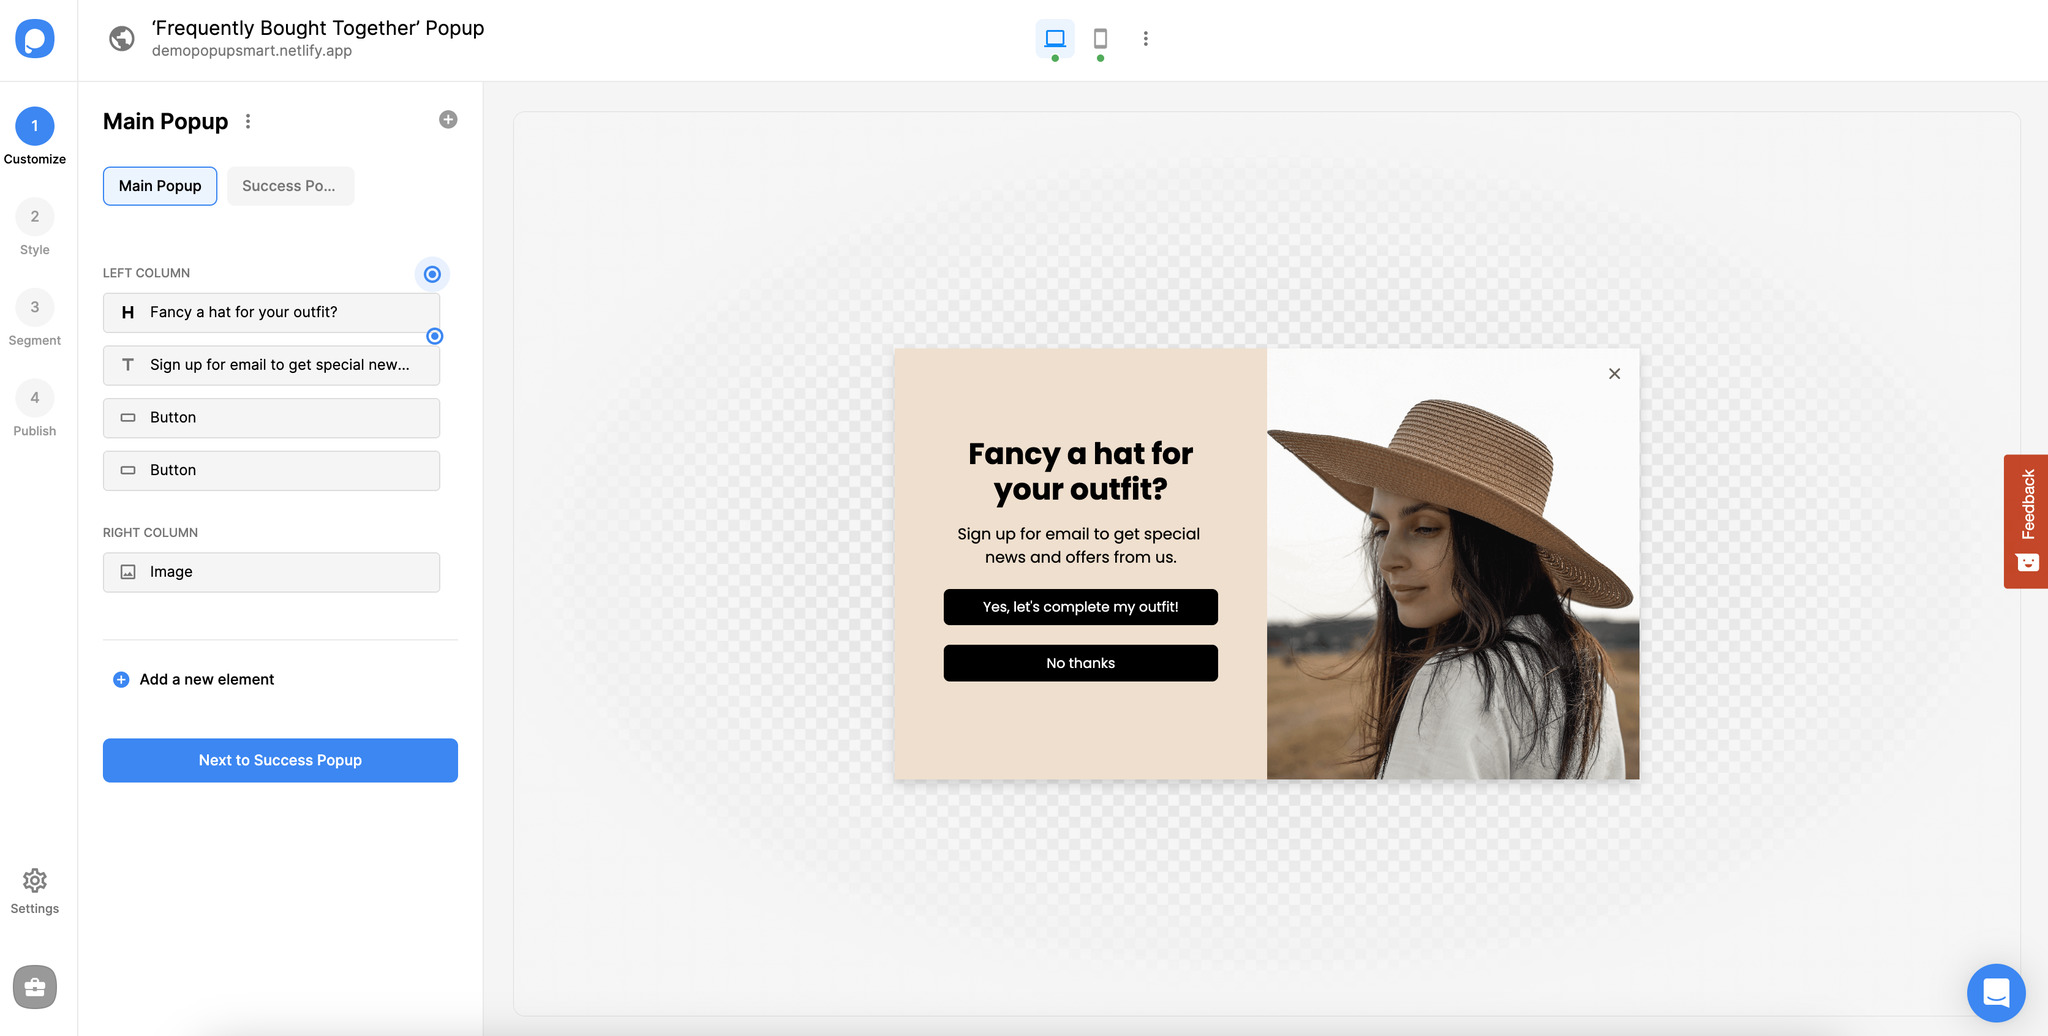 create and customize a popup campaign